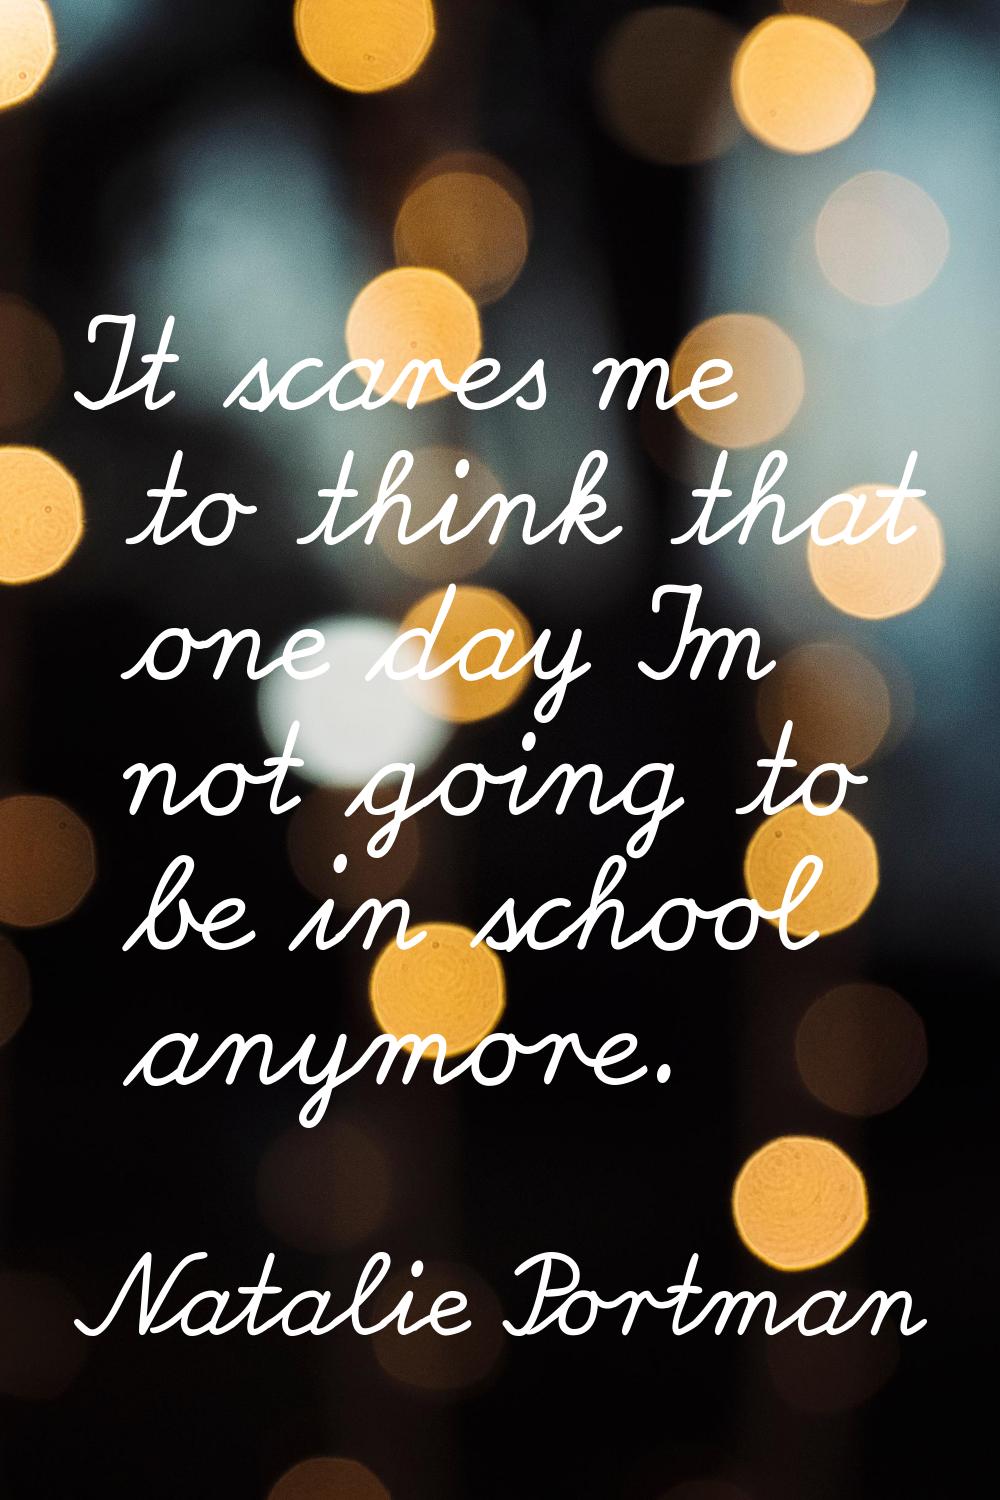 It scares me to think that one day I'm not going to be in school anymore.